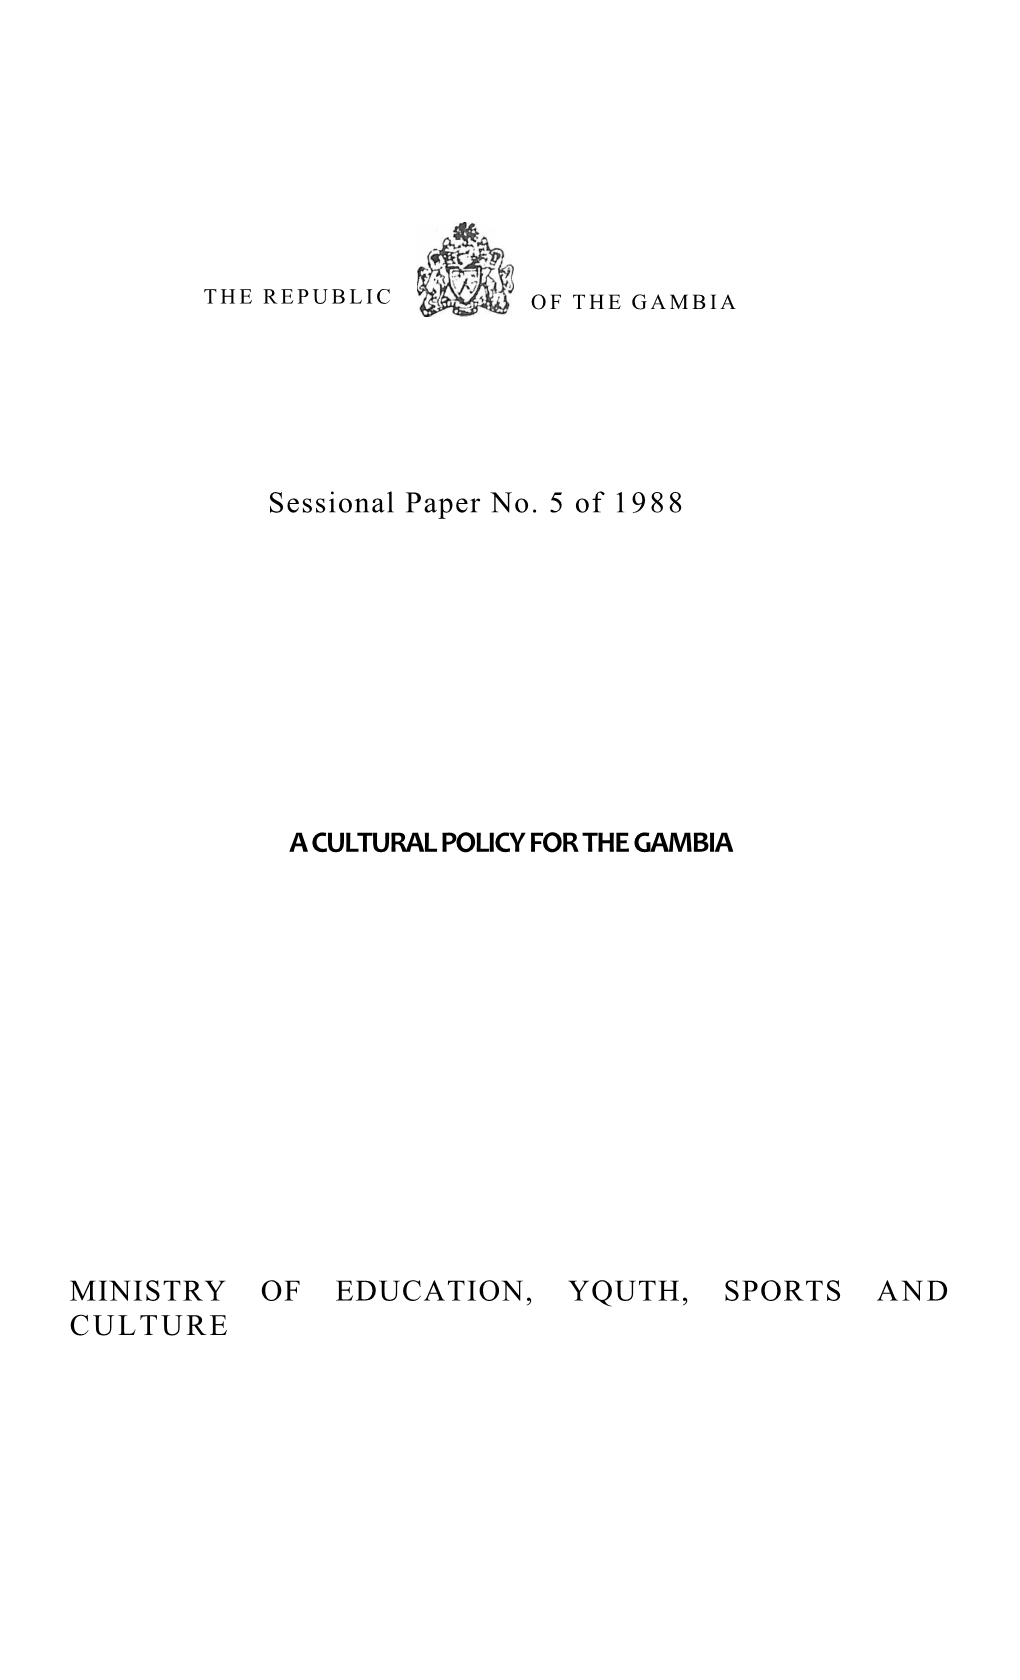 Sessional Paper No. 5 of 1988 a CULTURAL POLICY for THE